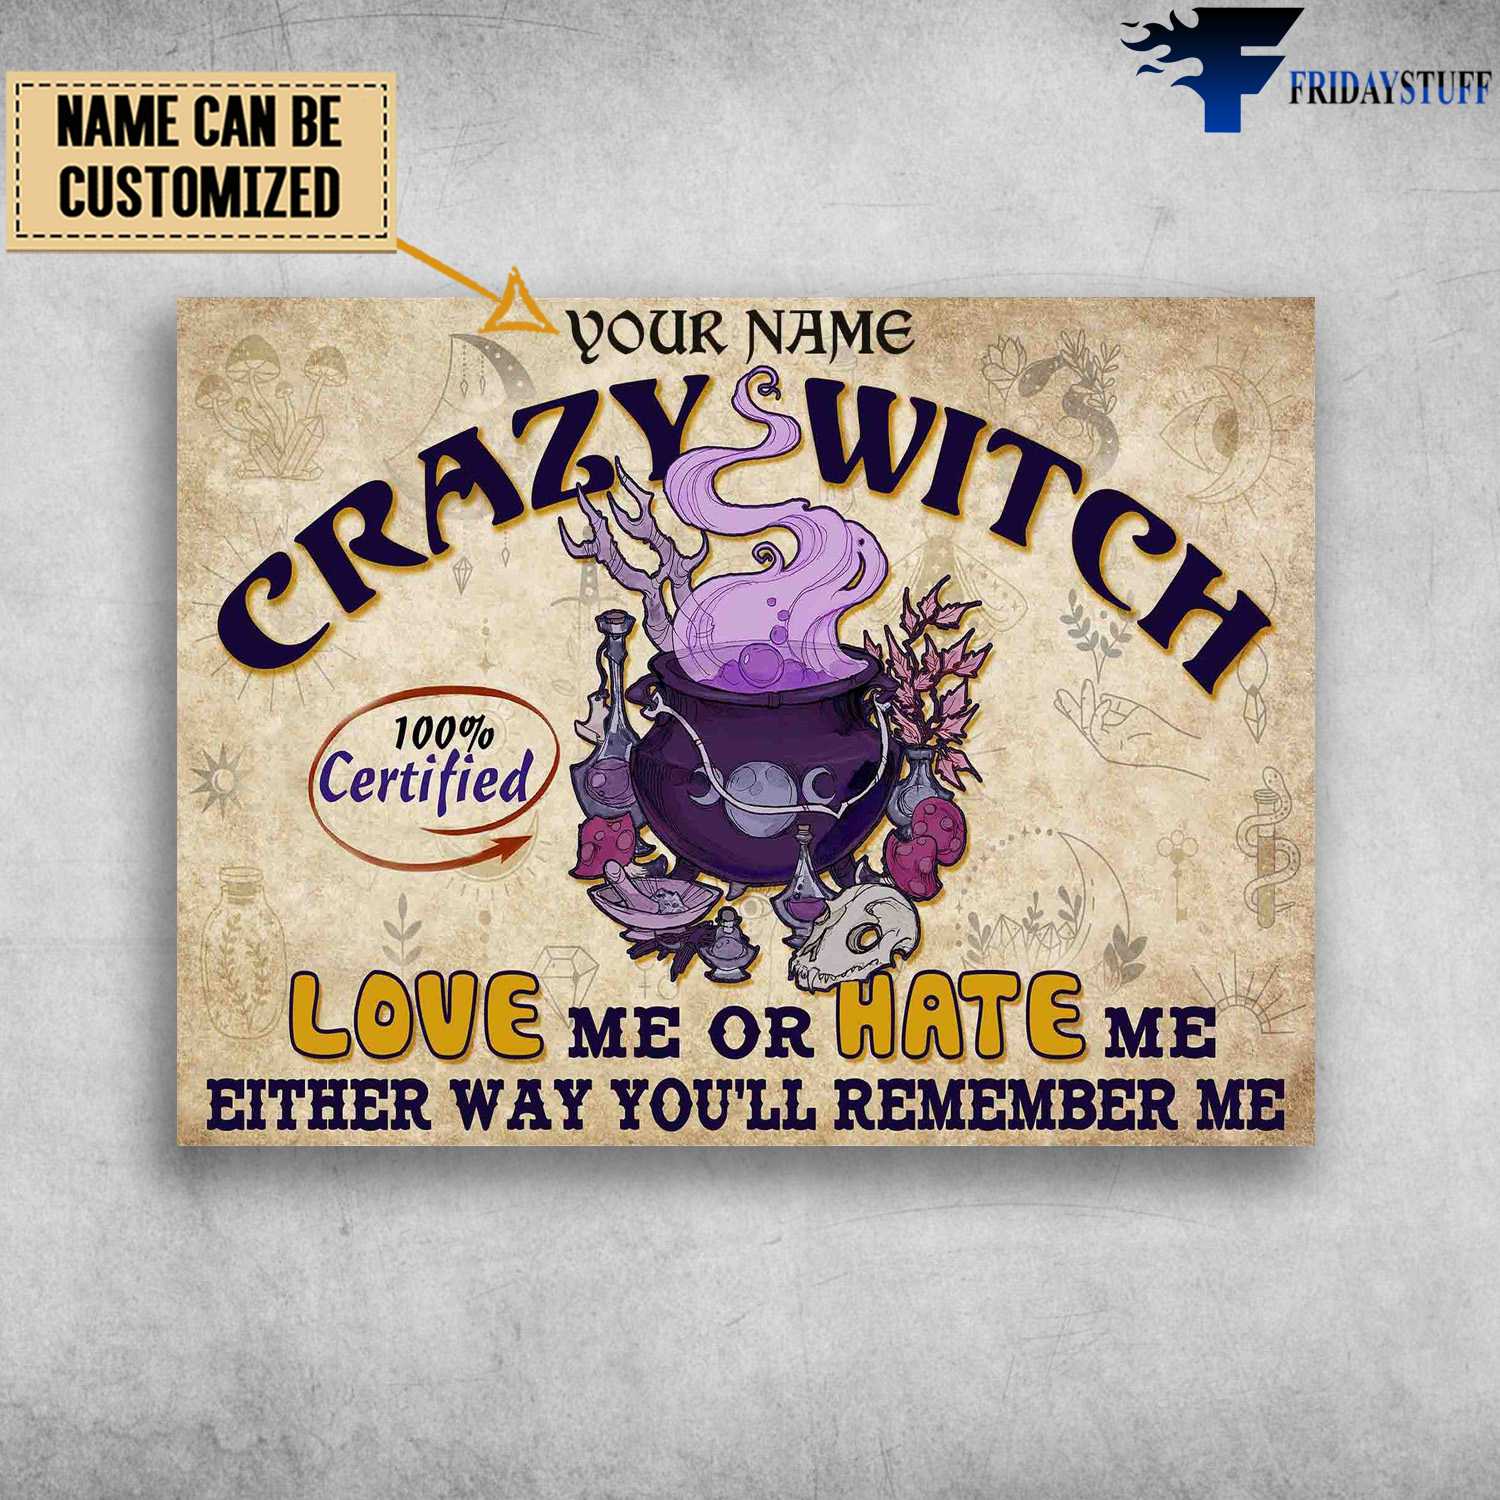 Halloween Poster, Crazy Witch, 100% Certified, Love Me Or Hate Me, Either Way You'll Remember Me